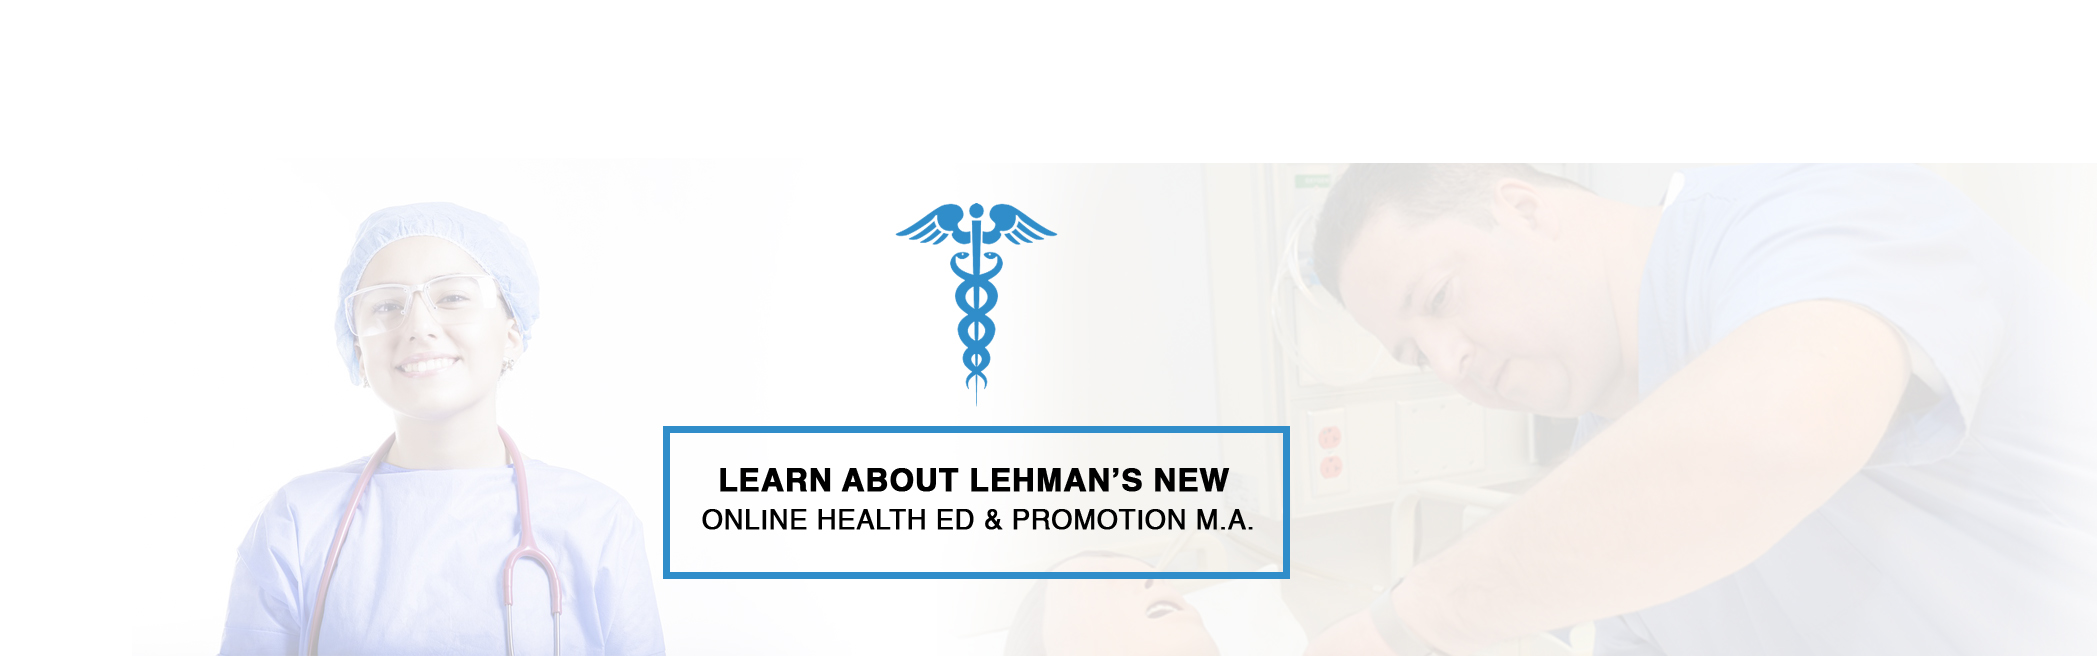 Lehman's New Online M.A. in Health Education and Promotion